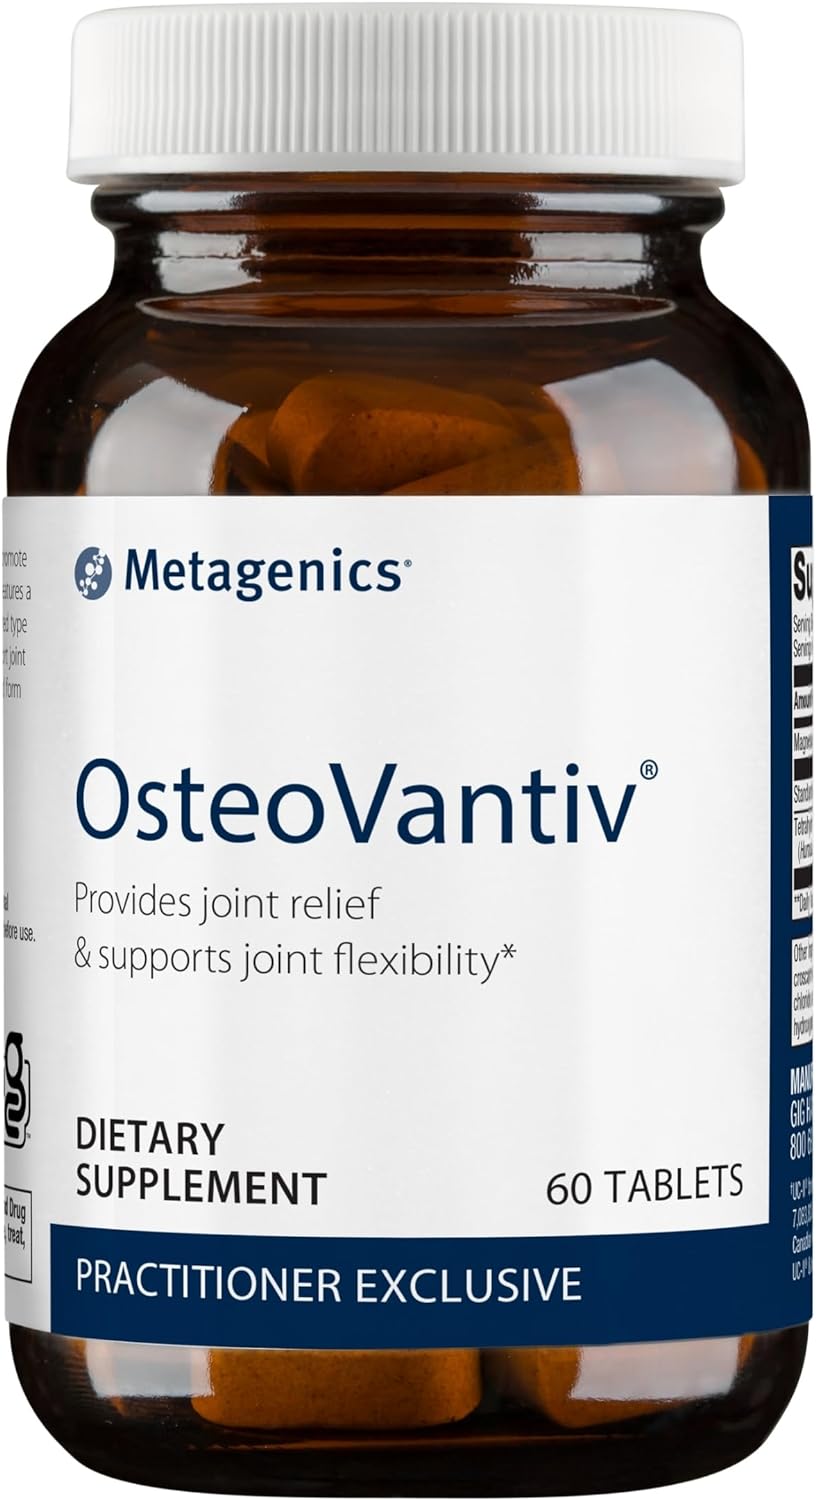 Metagenics OsteoVantiv Joint Support Supplement Helps Provide Joint Re